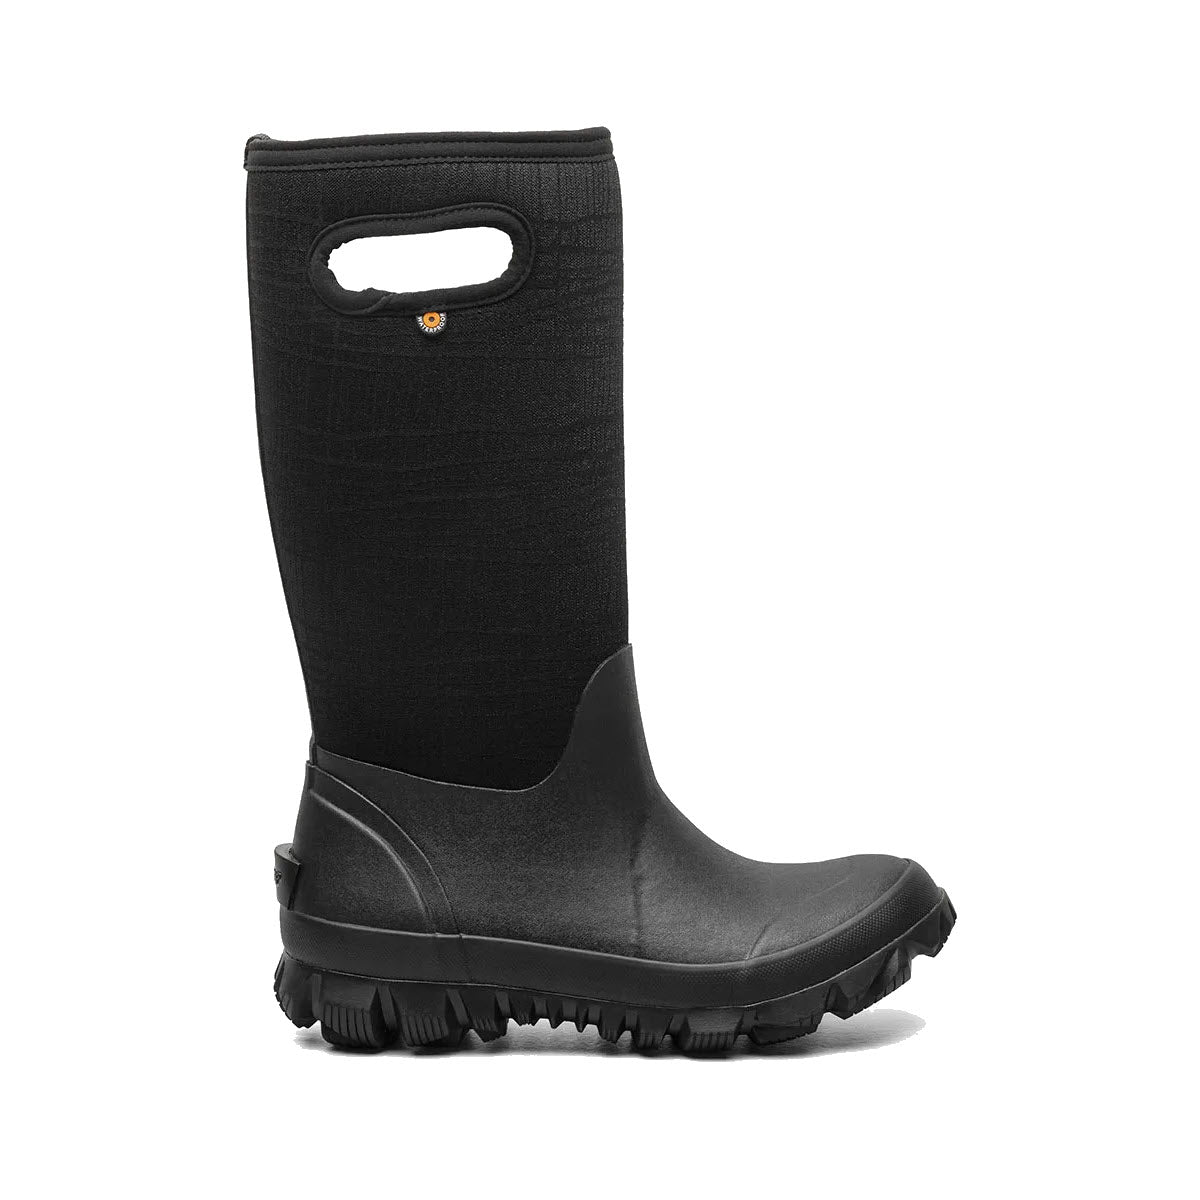 Bogs WhiteOut Cracks Black women's boot with a tall, textured fabric shaft and a fleece lining, isolated on a white background.